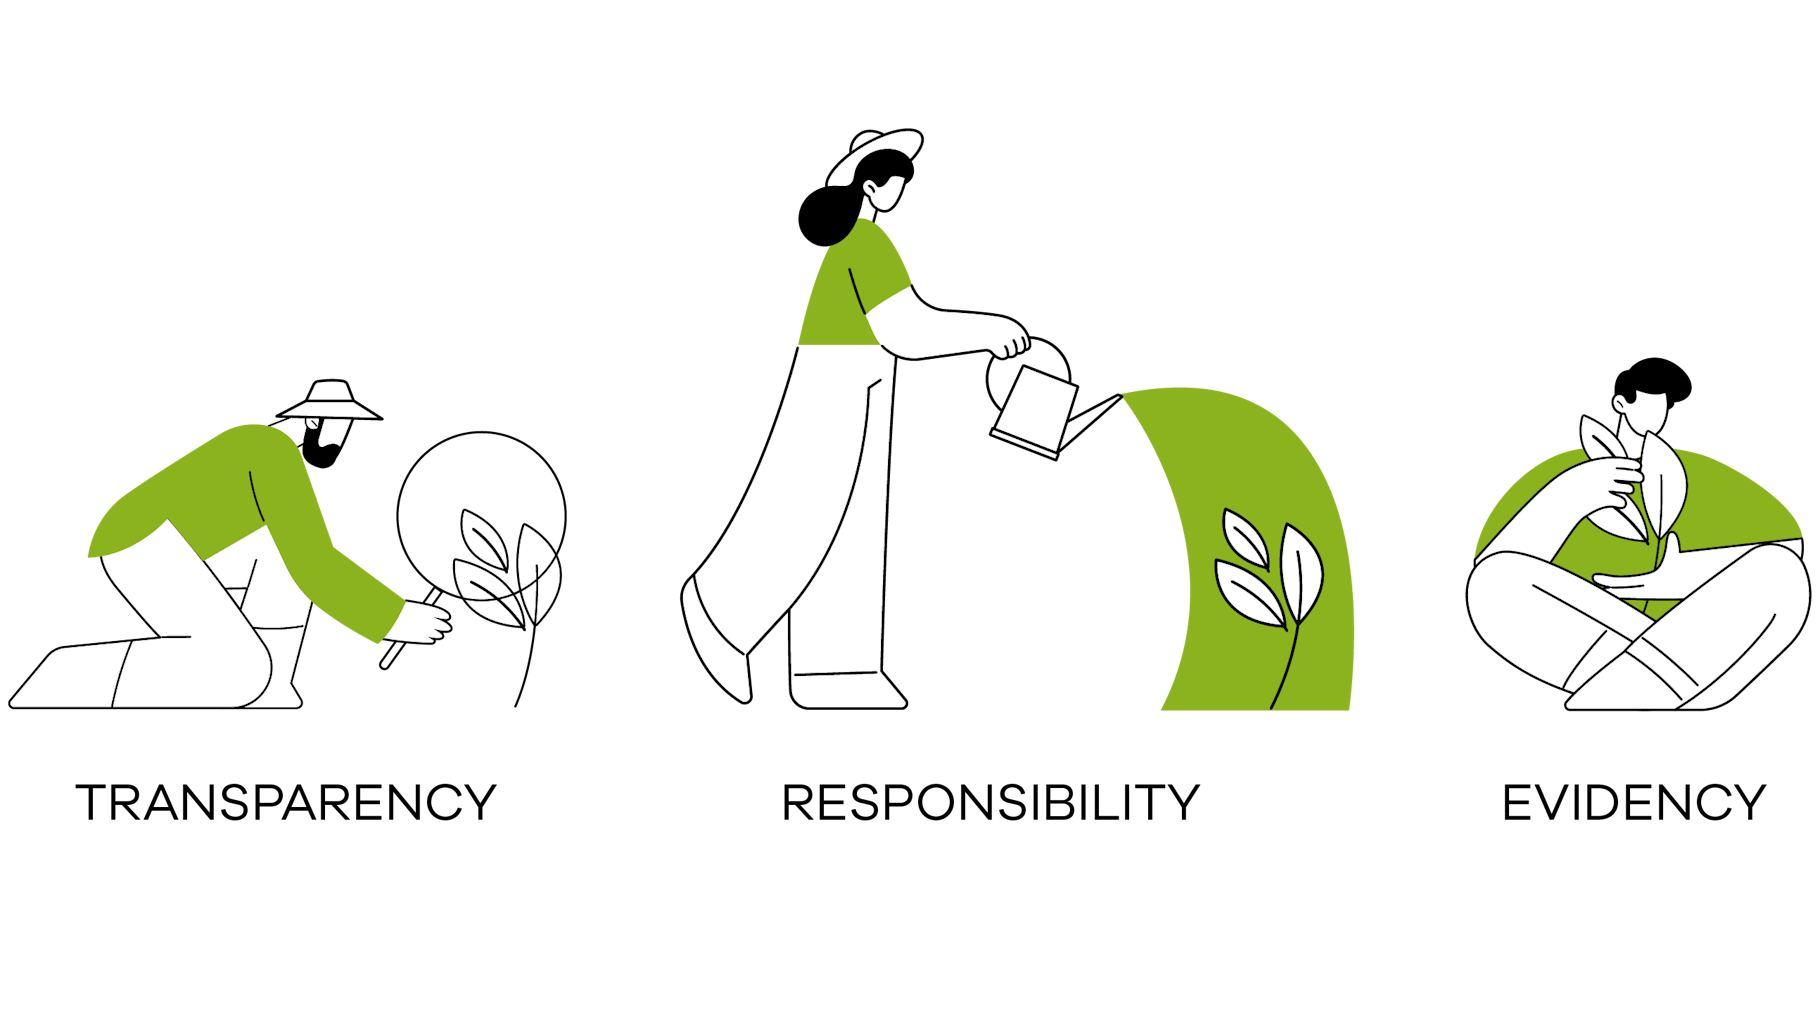 Drawn graphic on the topic of sustainability reportig, with the three focal points transparency, responsibility and evidence.